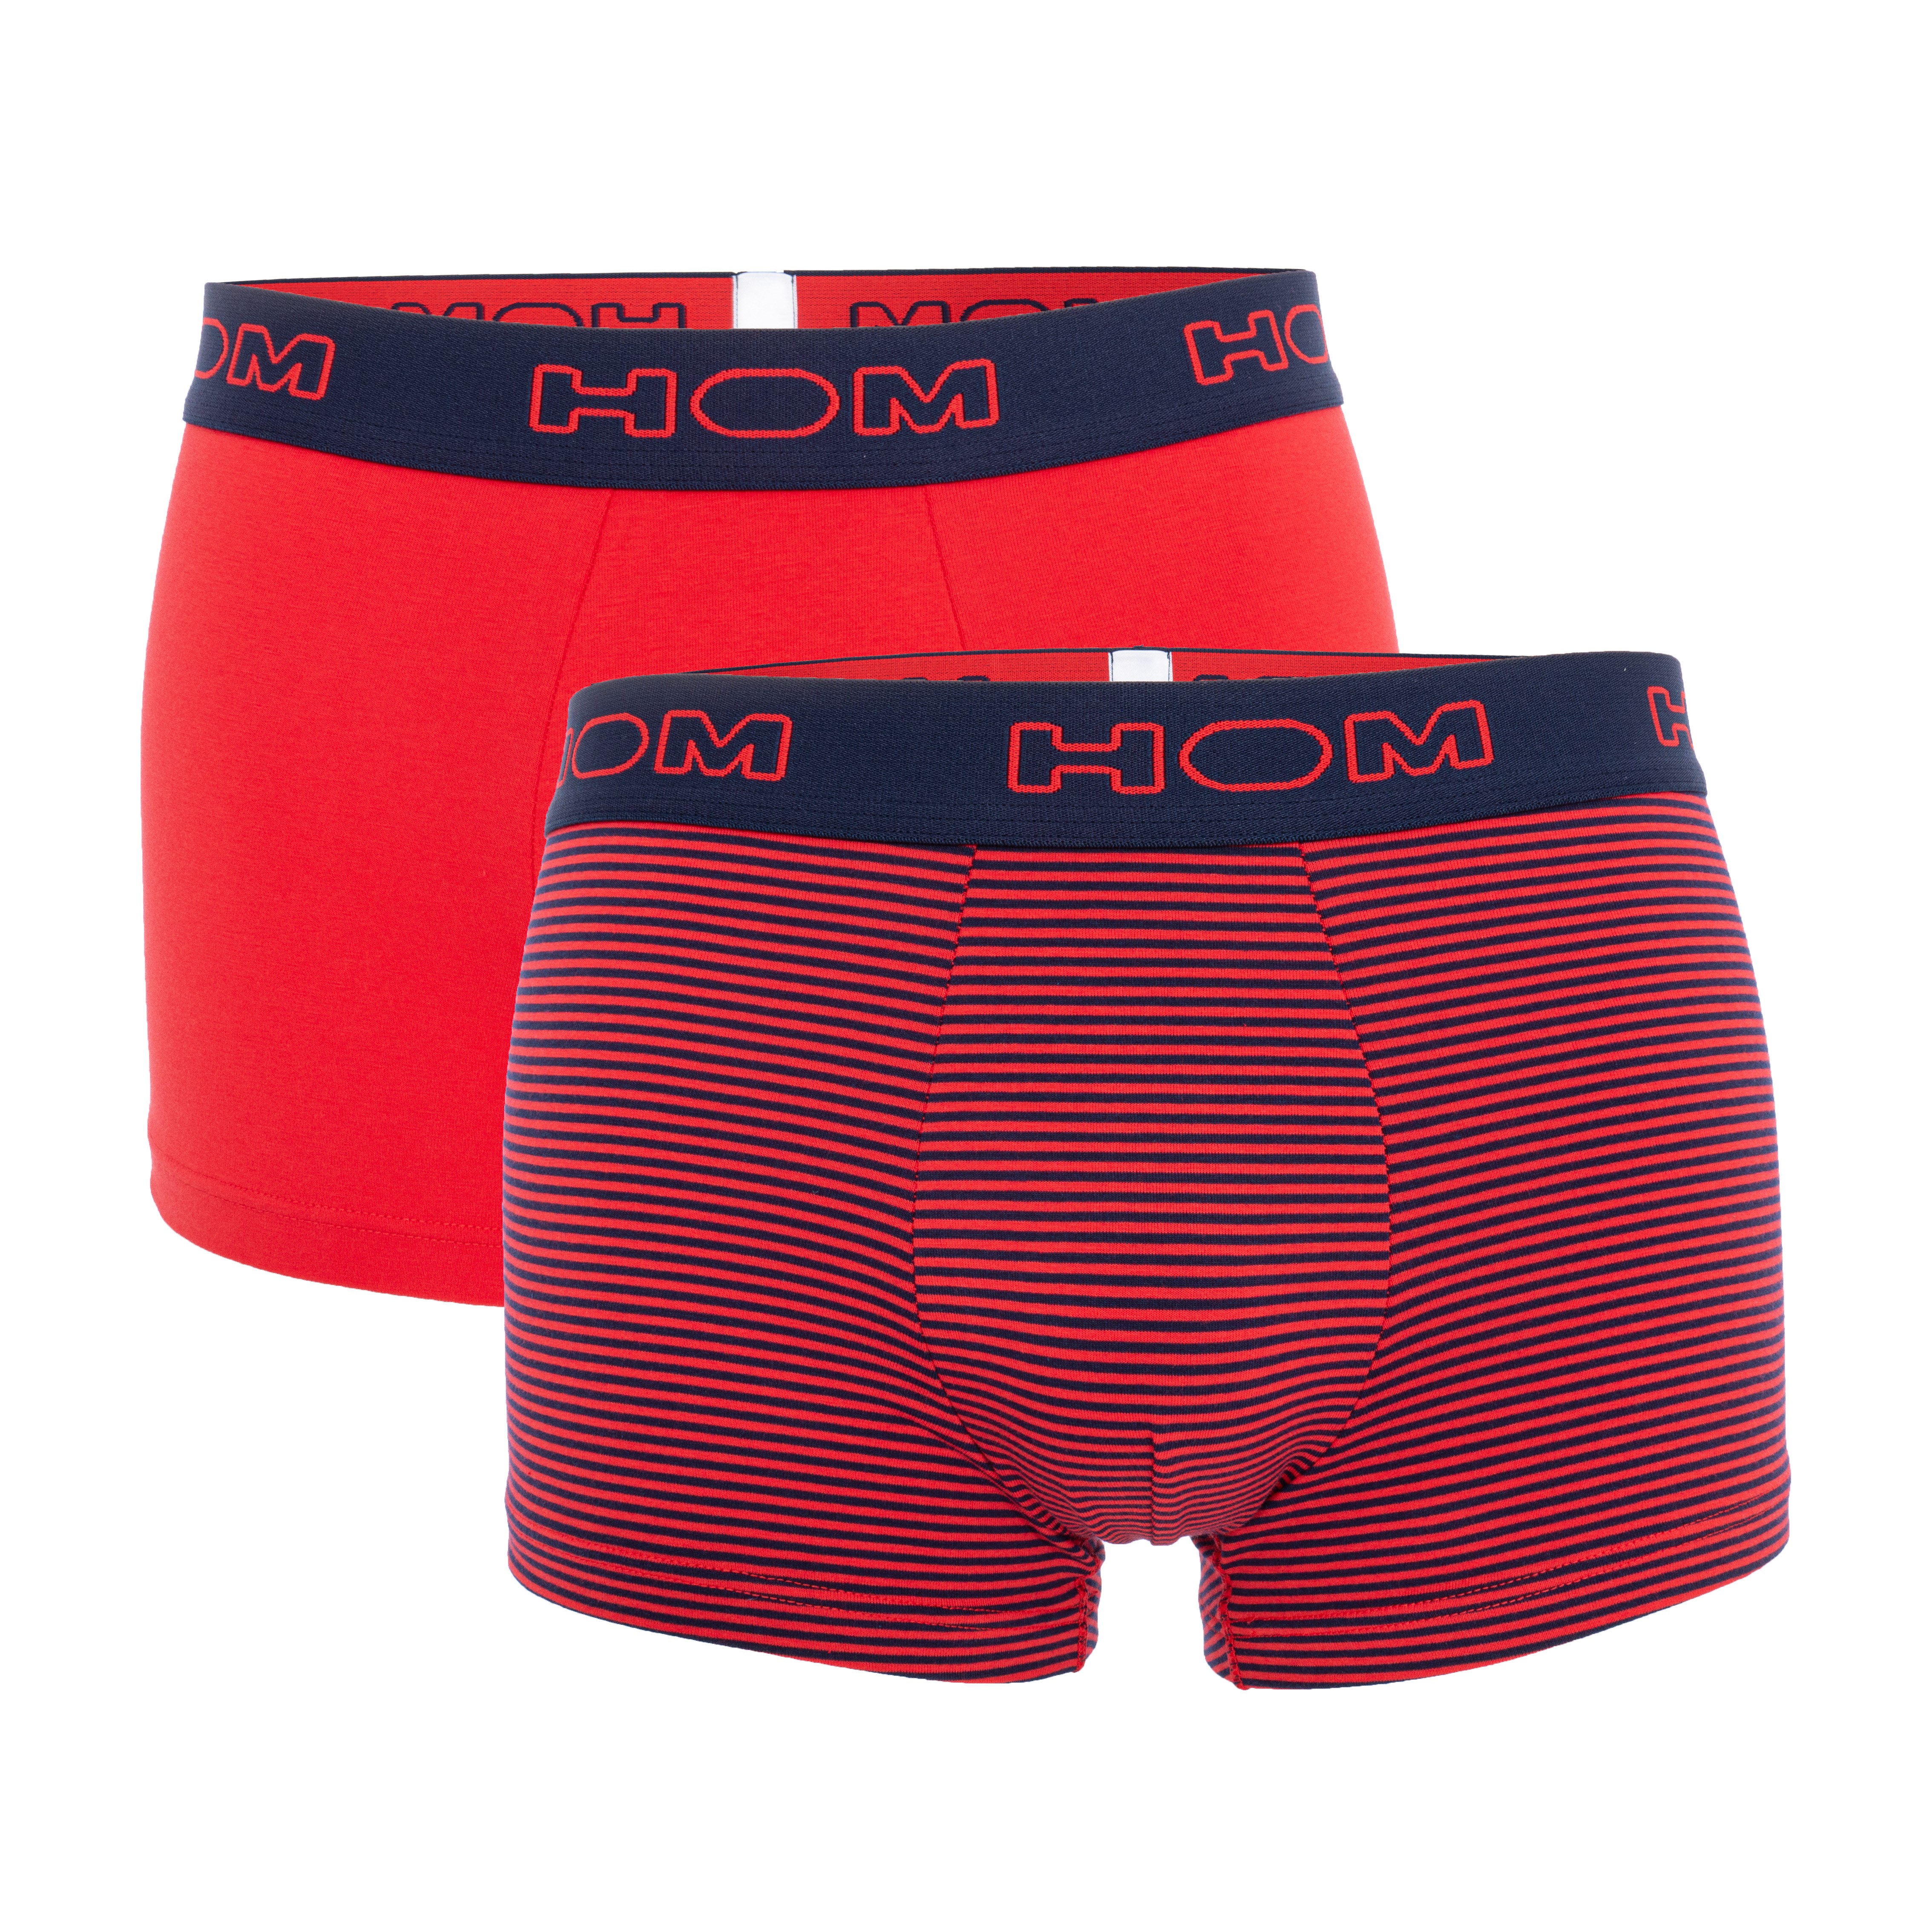 Lot of 2 Marine Boxers - red: Packs for man brand HOM for sale onli